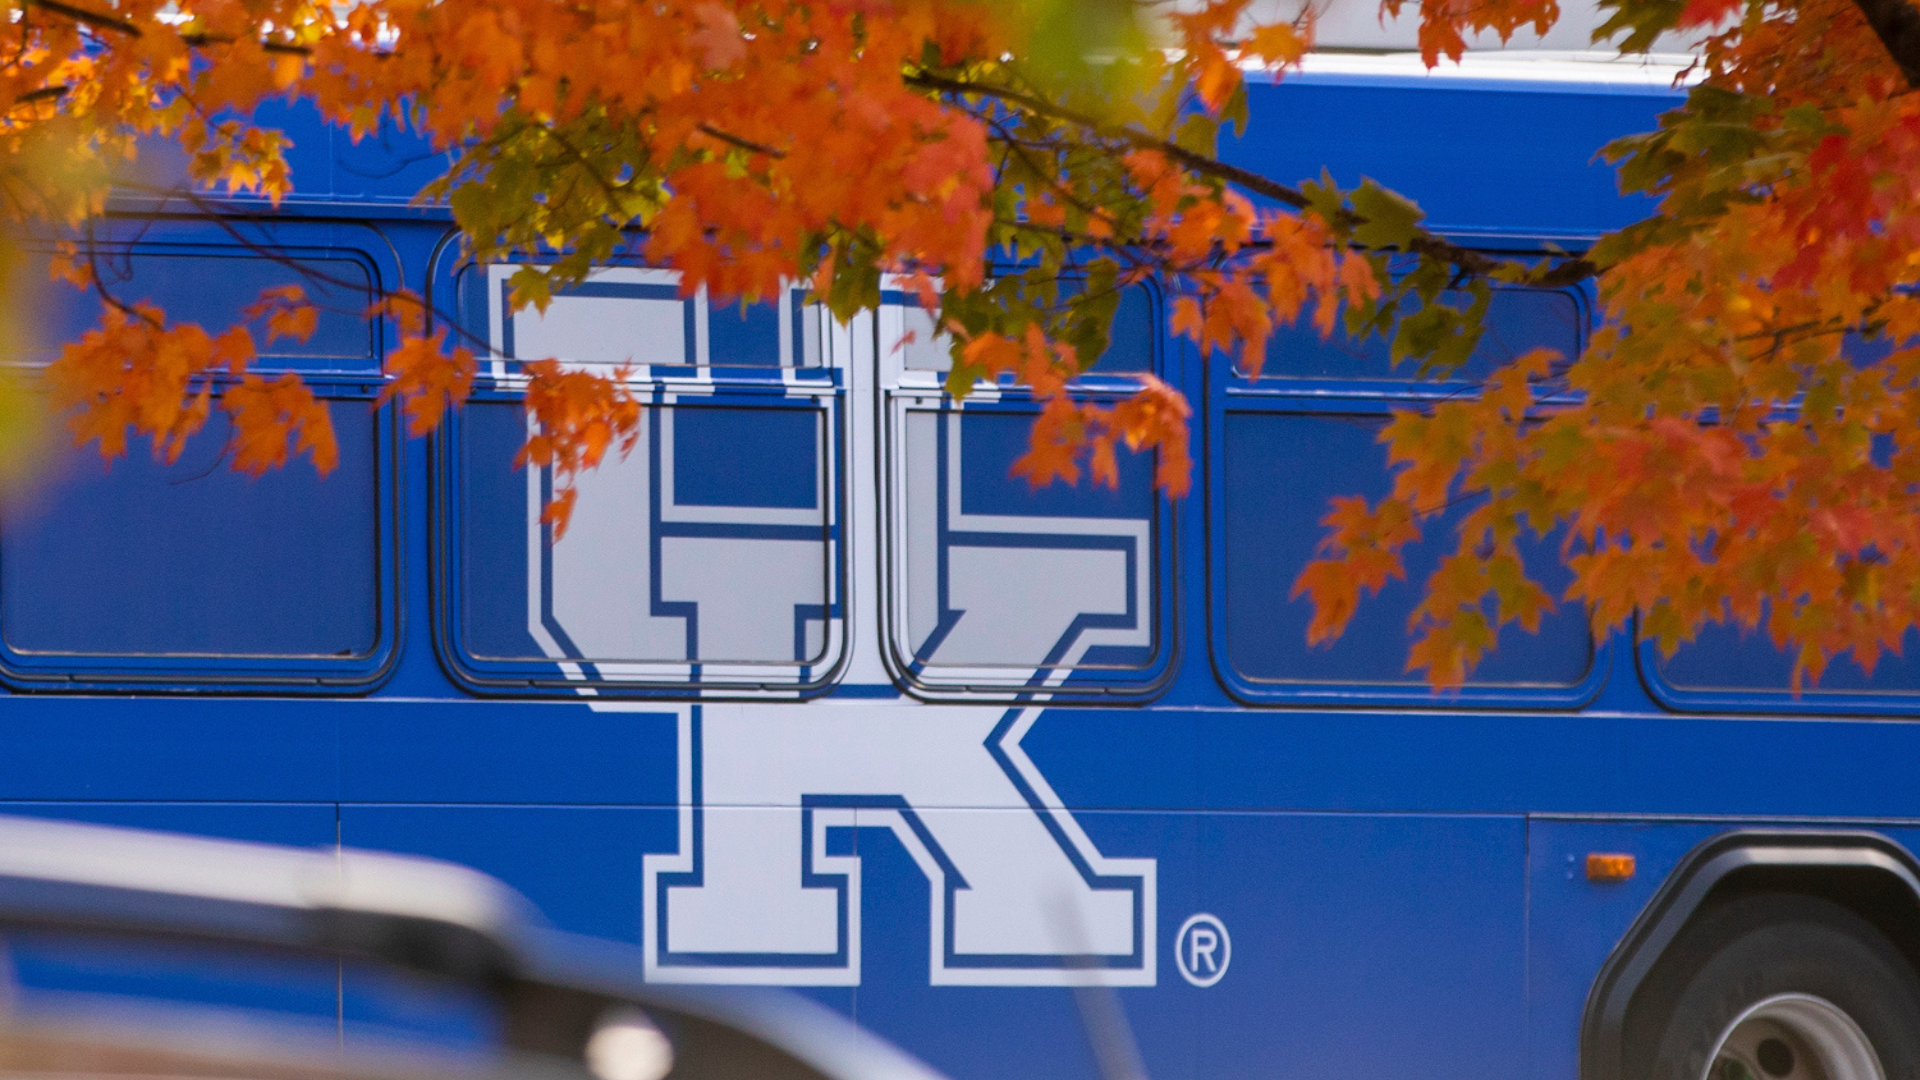 Blue bus with UK logo on side driving with branches and leaves in the foreground